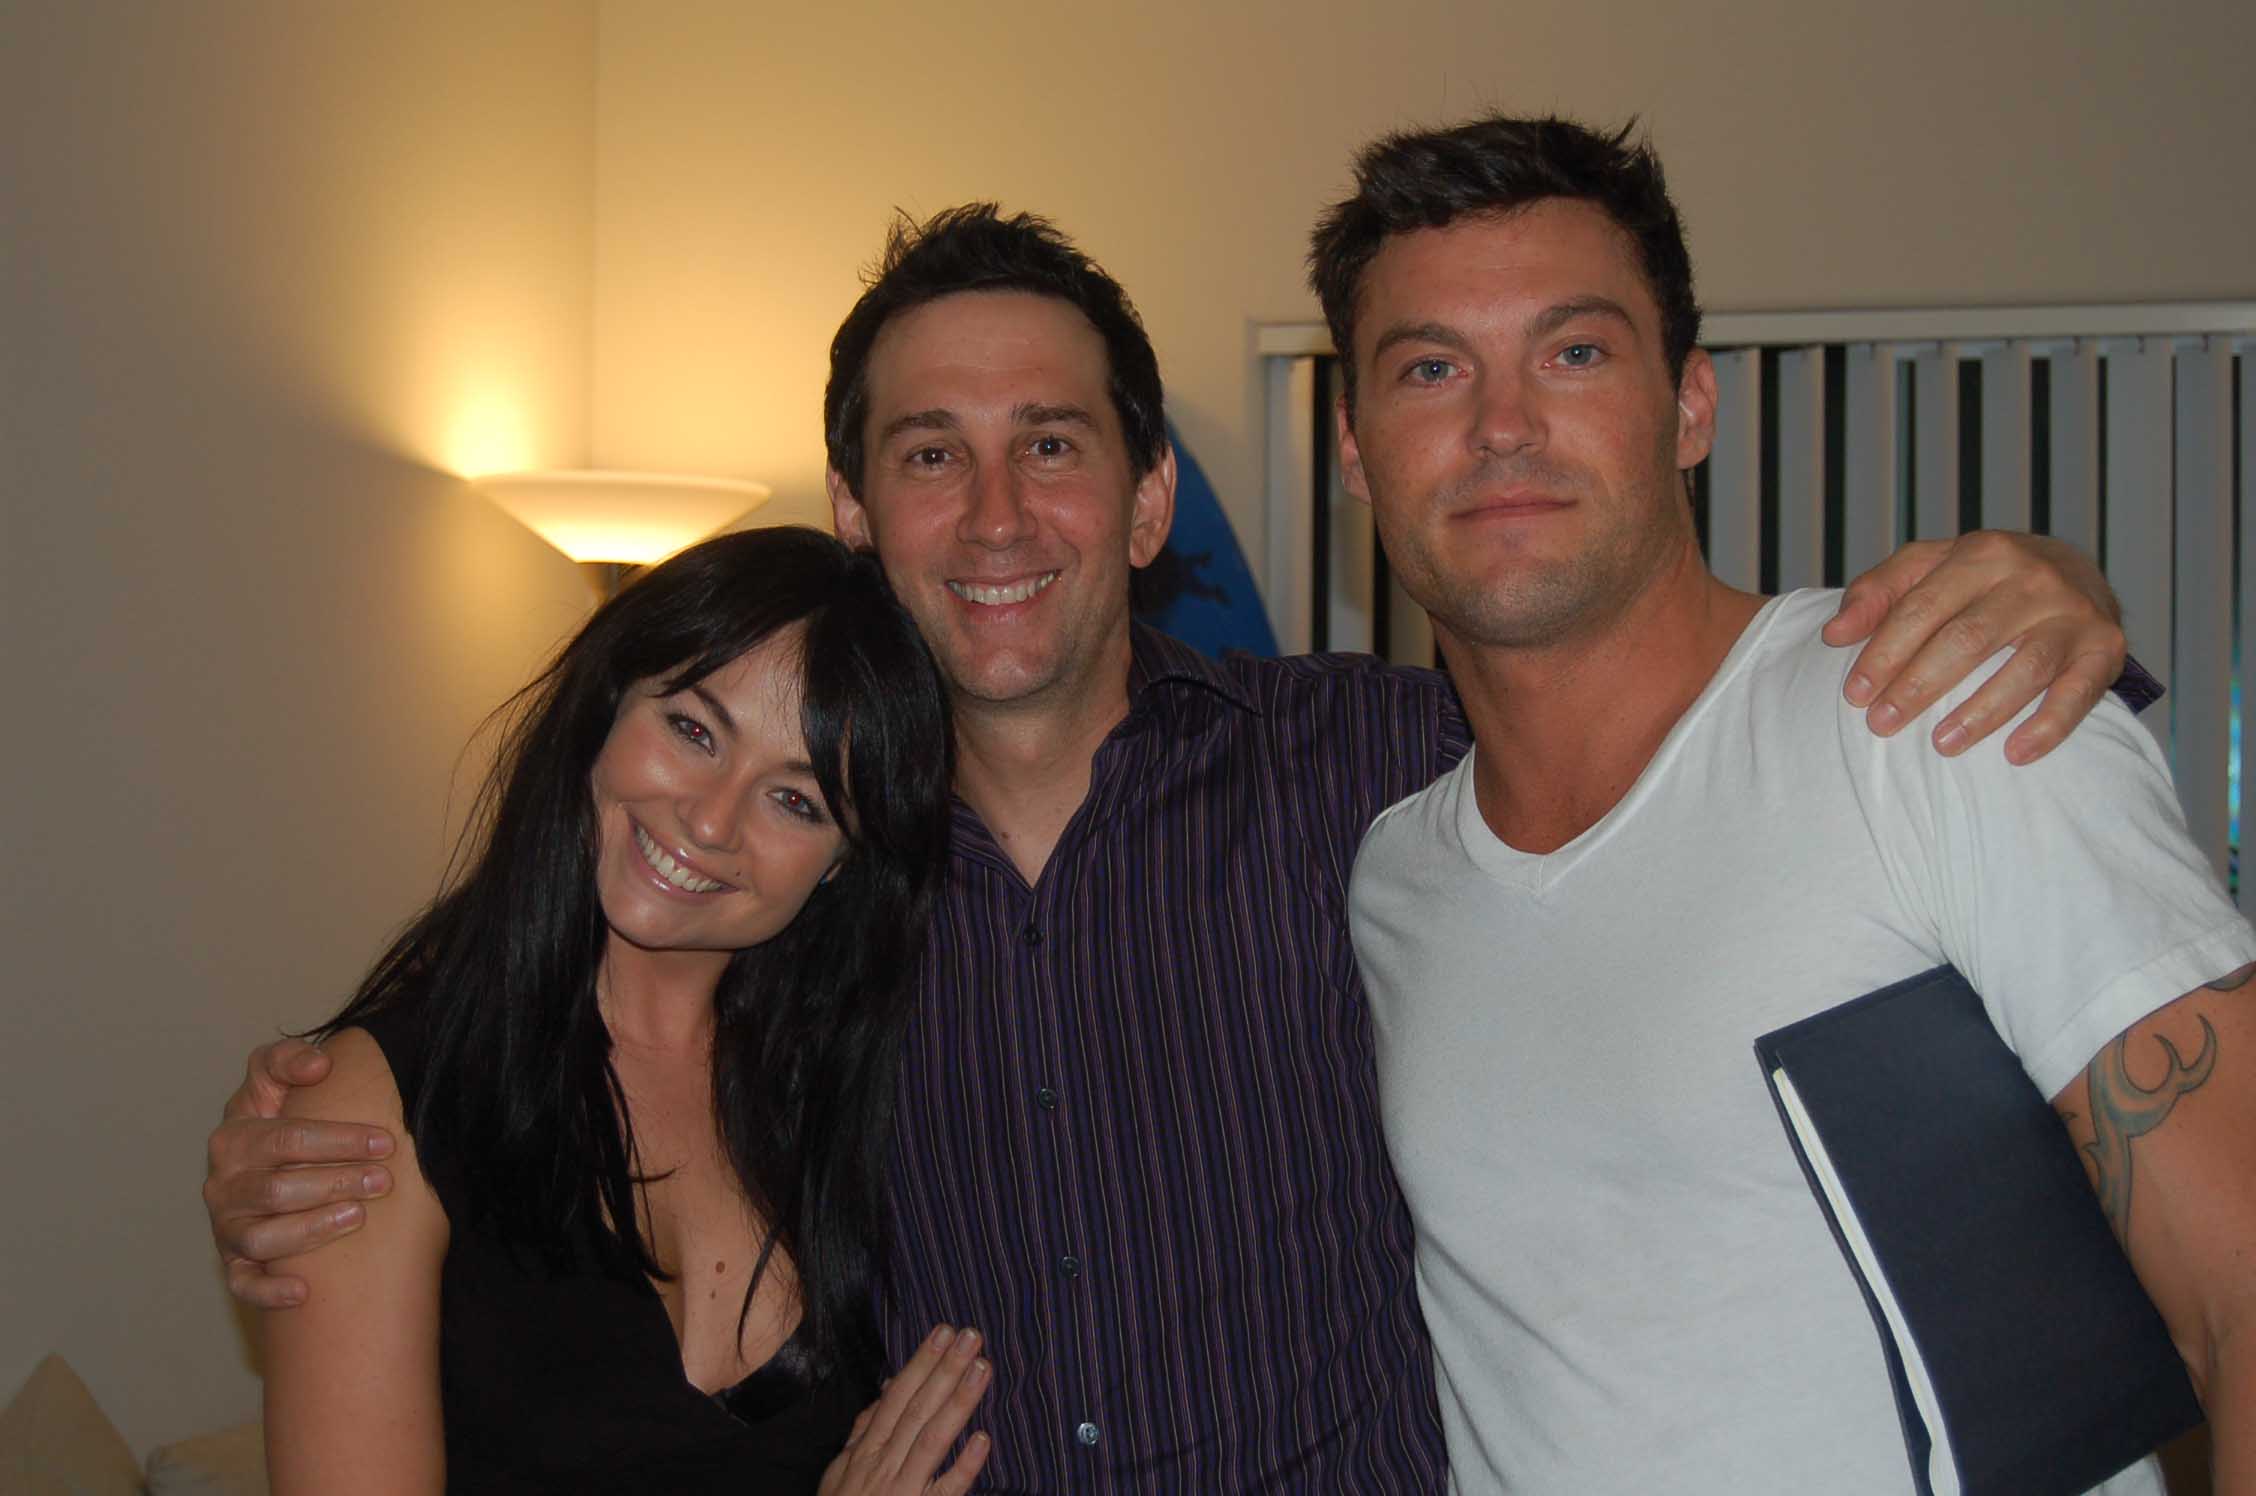 Robert Mann with Brian Austin Green and Lindsey Labram in 2007 film Shades of Love.